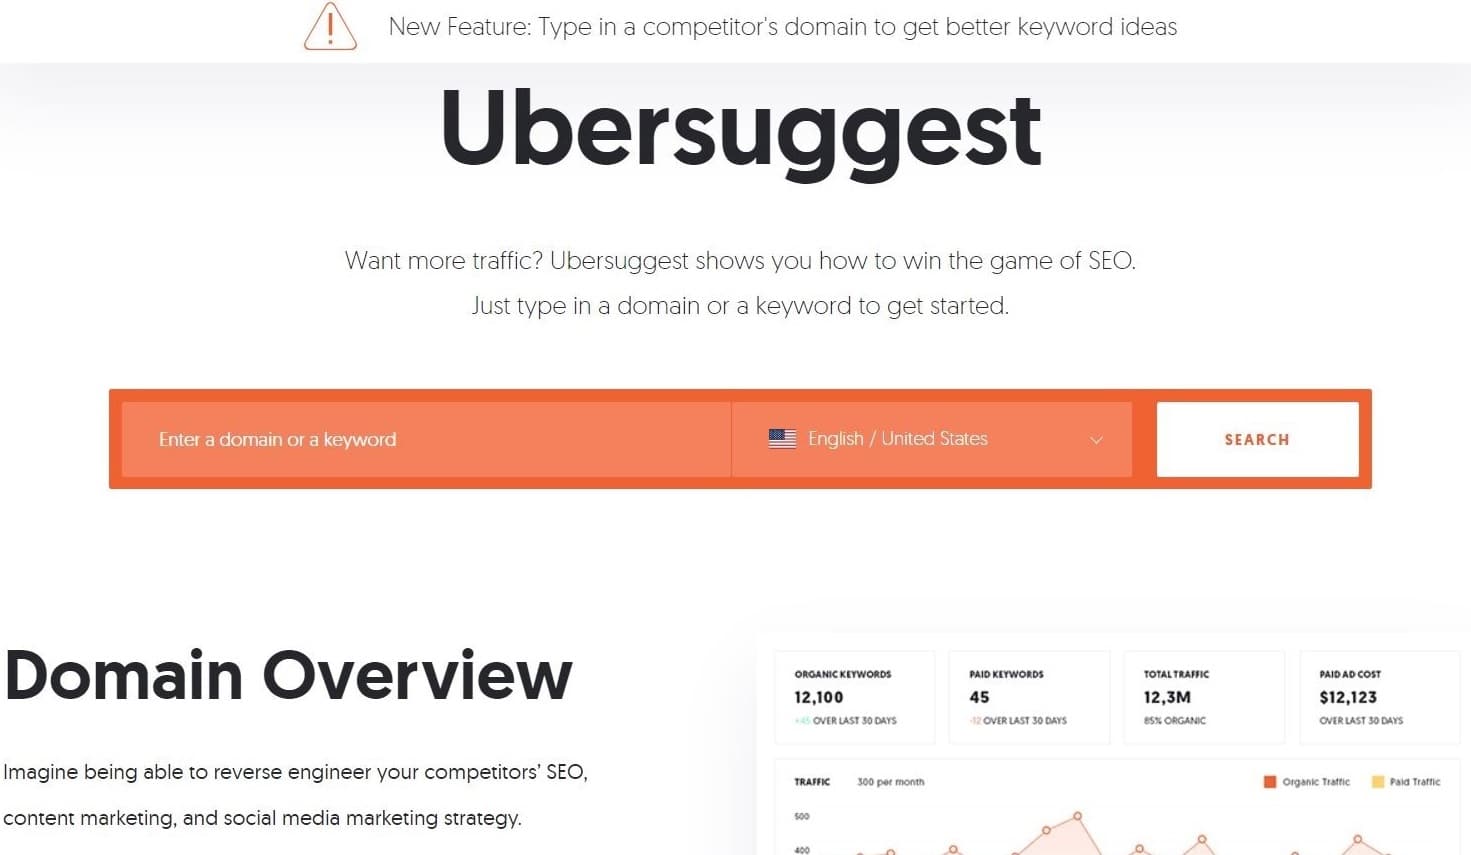 The Ubersuggest homepage featuring a large orange domain search bar.